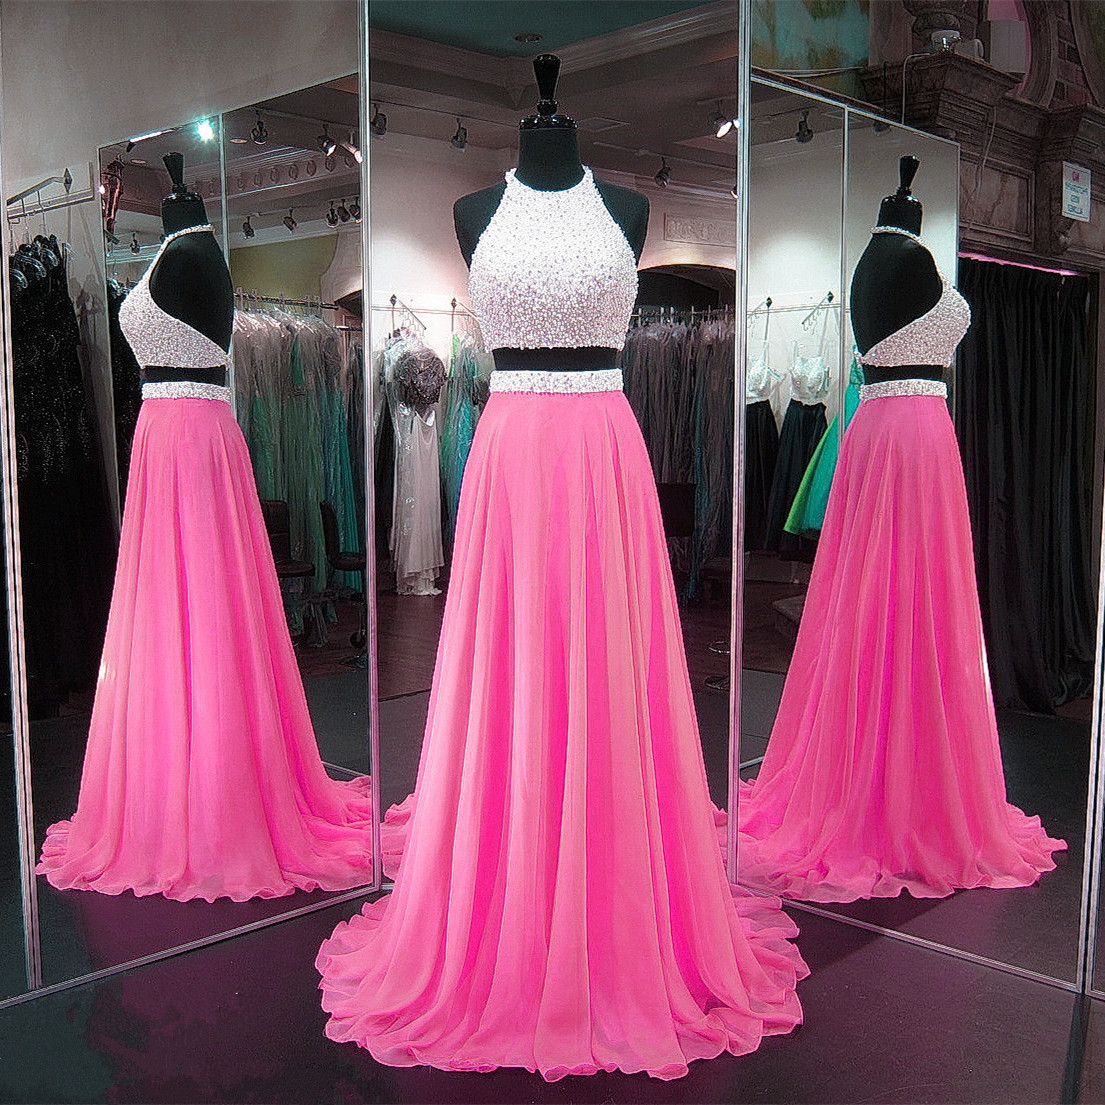 Pink Prom Dresses,chiffon Prom Gowns,two Piece Prom Dress,2 Piece Prom Dress,long Prom Dresses 2017,halter Prom Dress